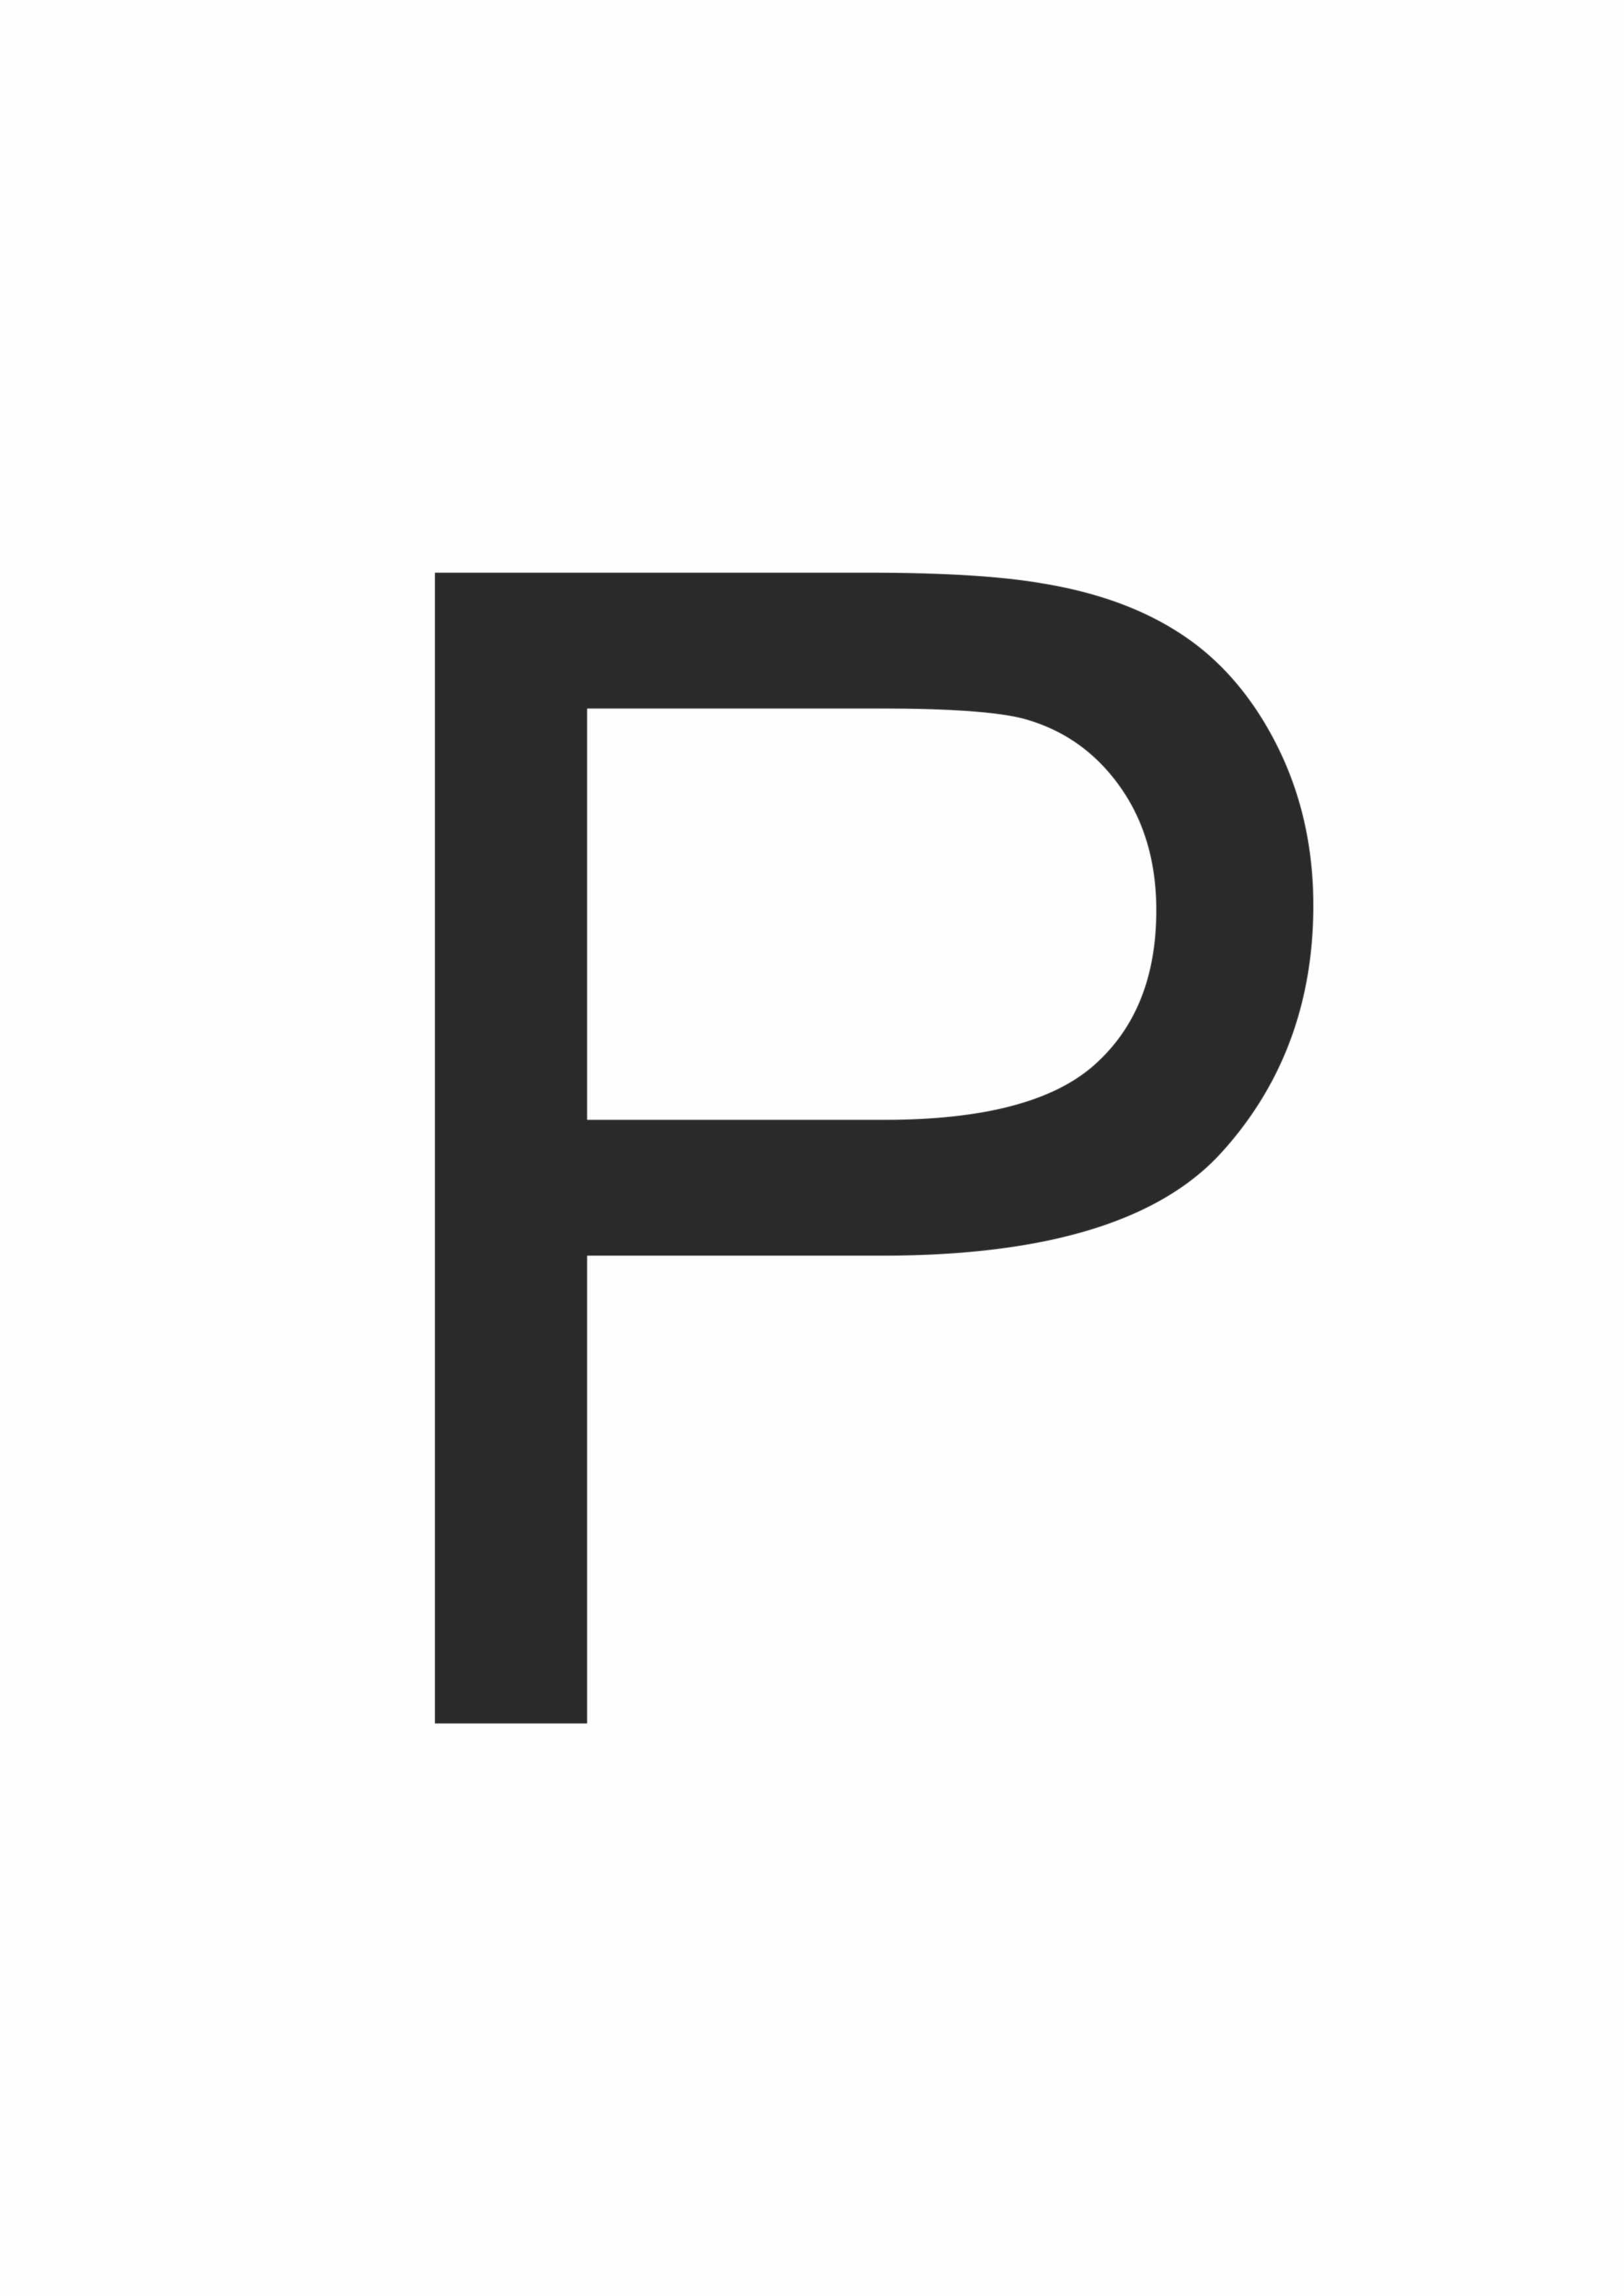 P Letter Design In Black With White Background